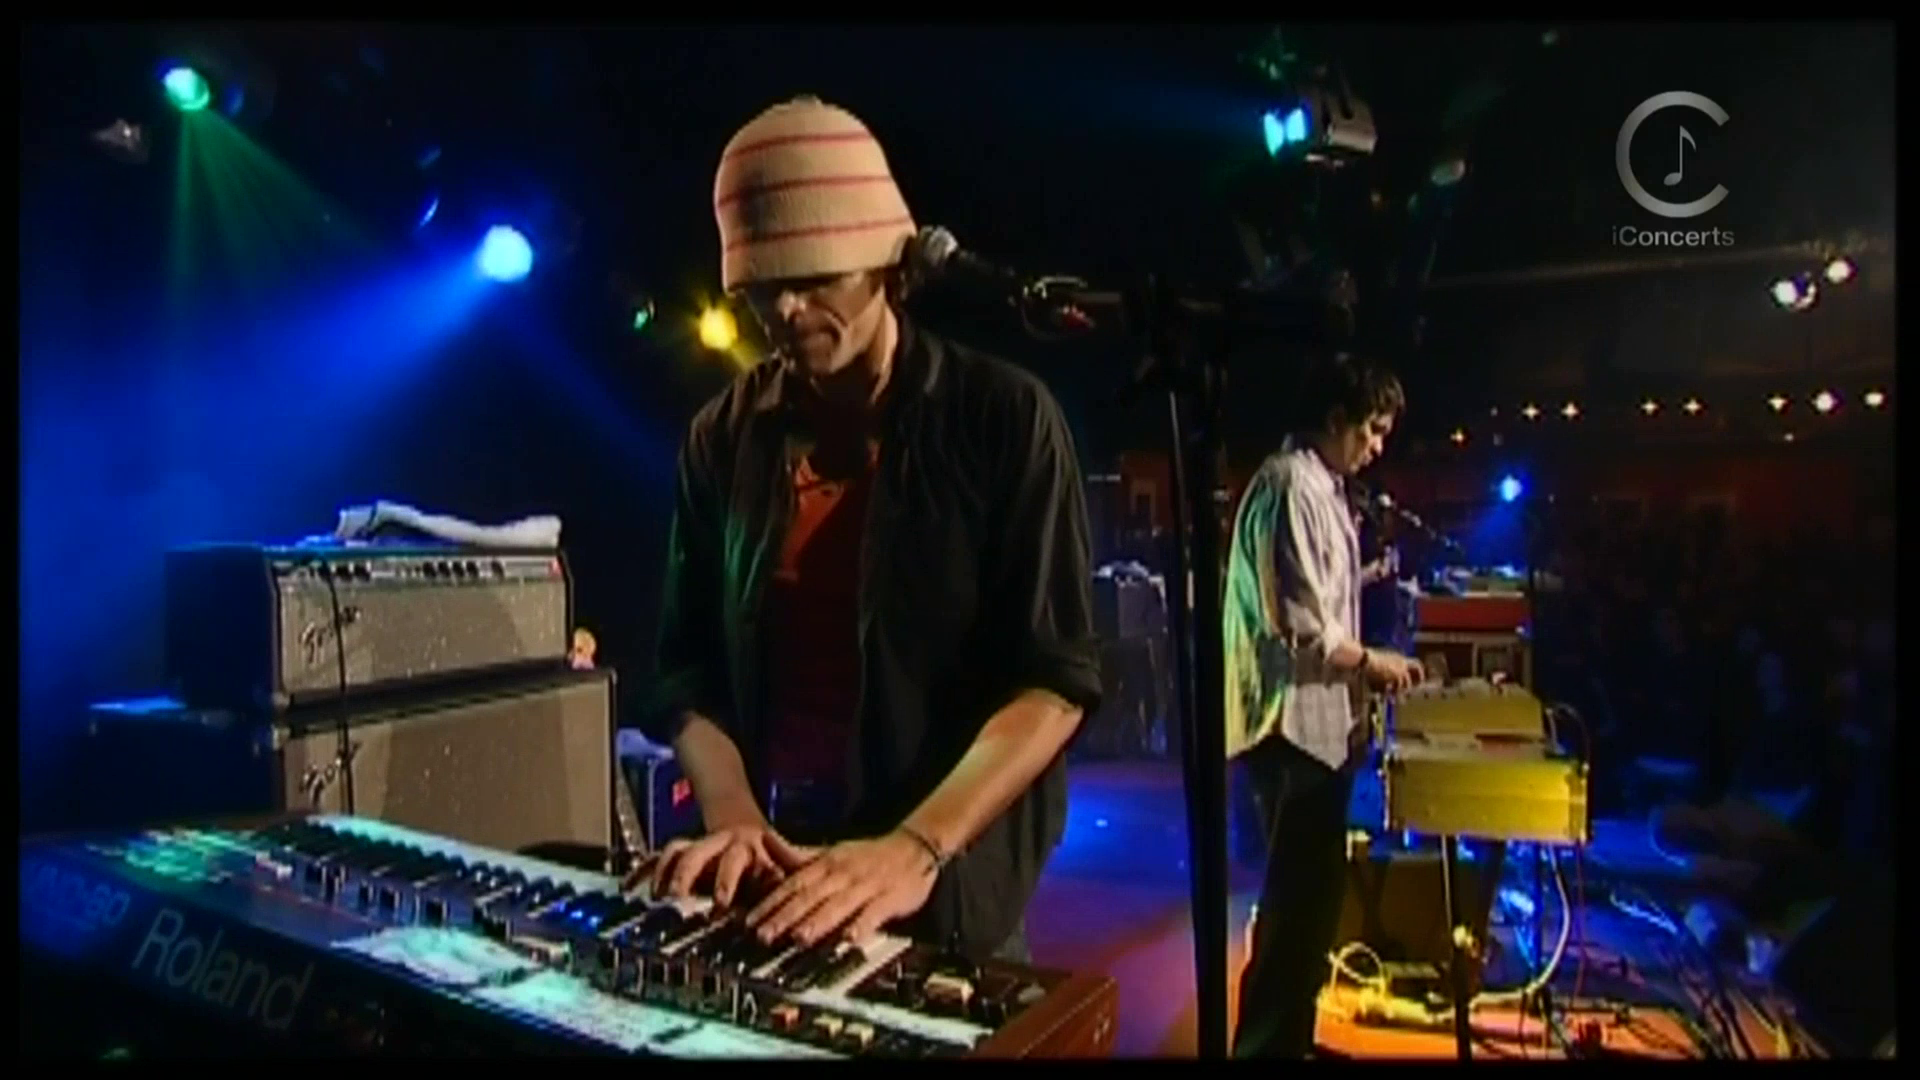 2004 General Electrics - Live at The New Morning [HDTV 1080p] 6